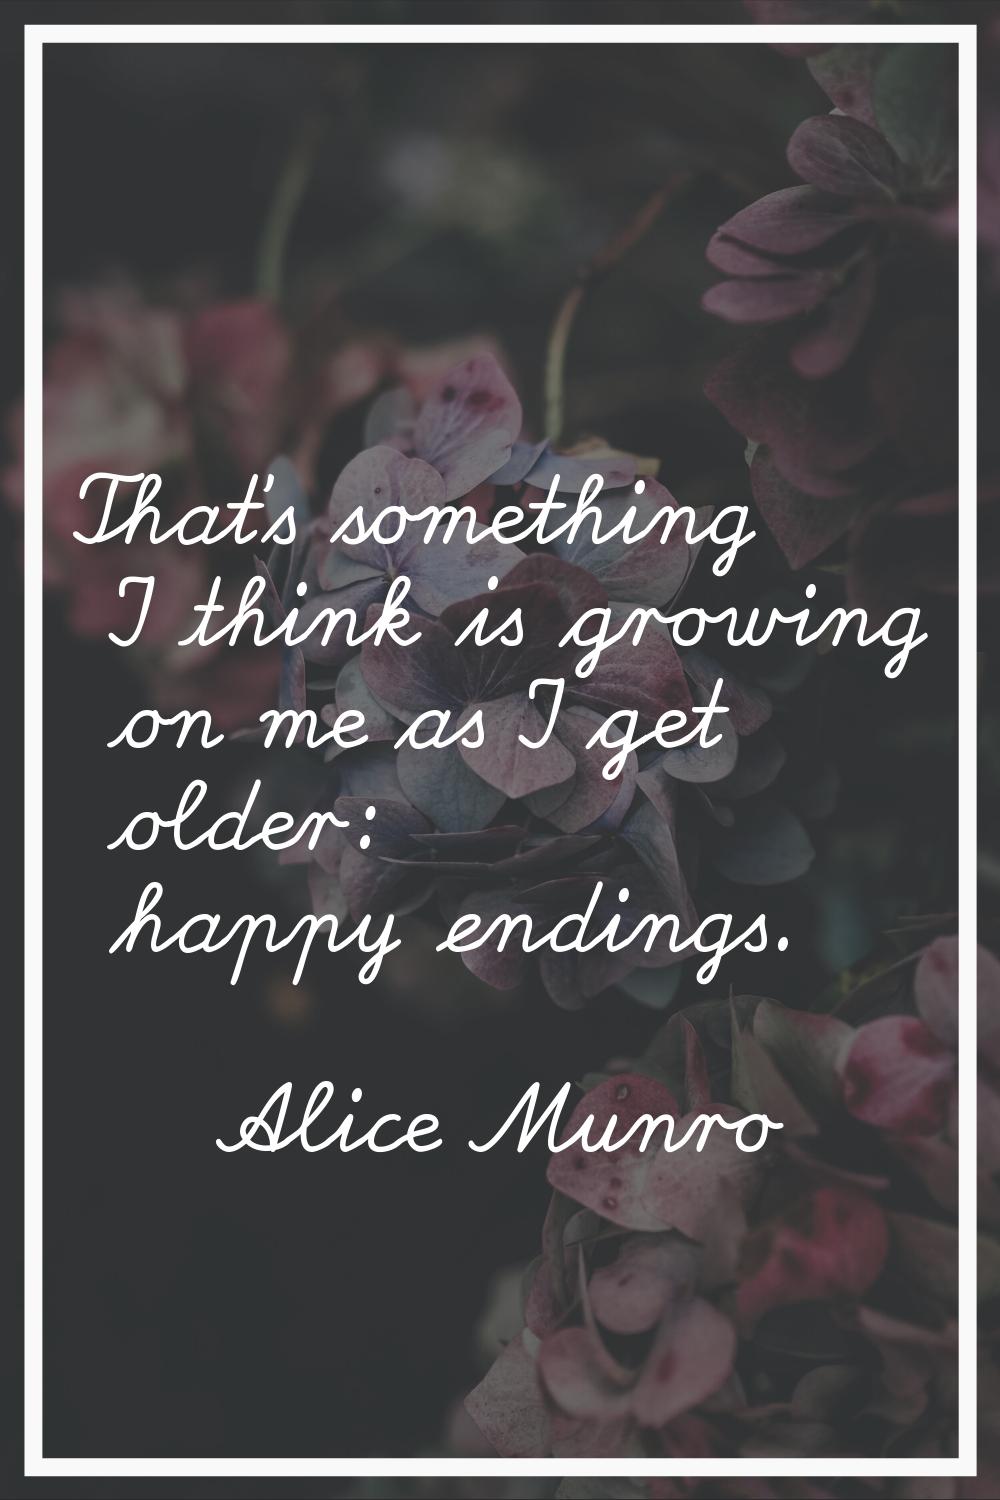 That's something I think is growing on me as I get older: happy endings.